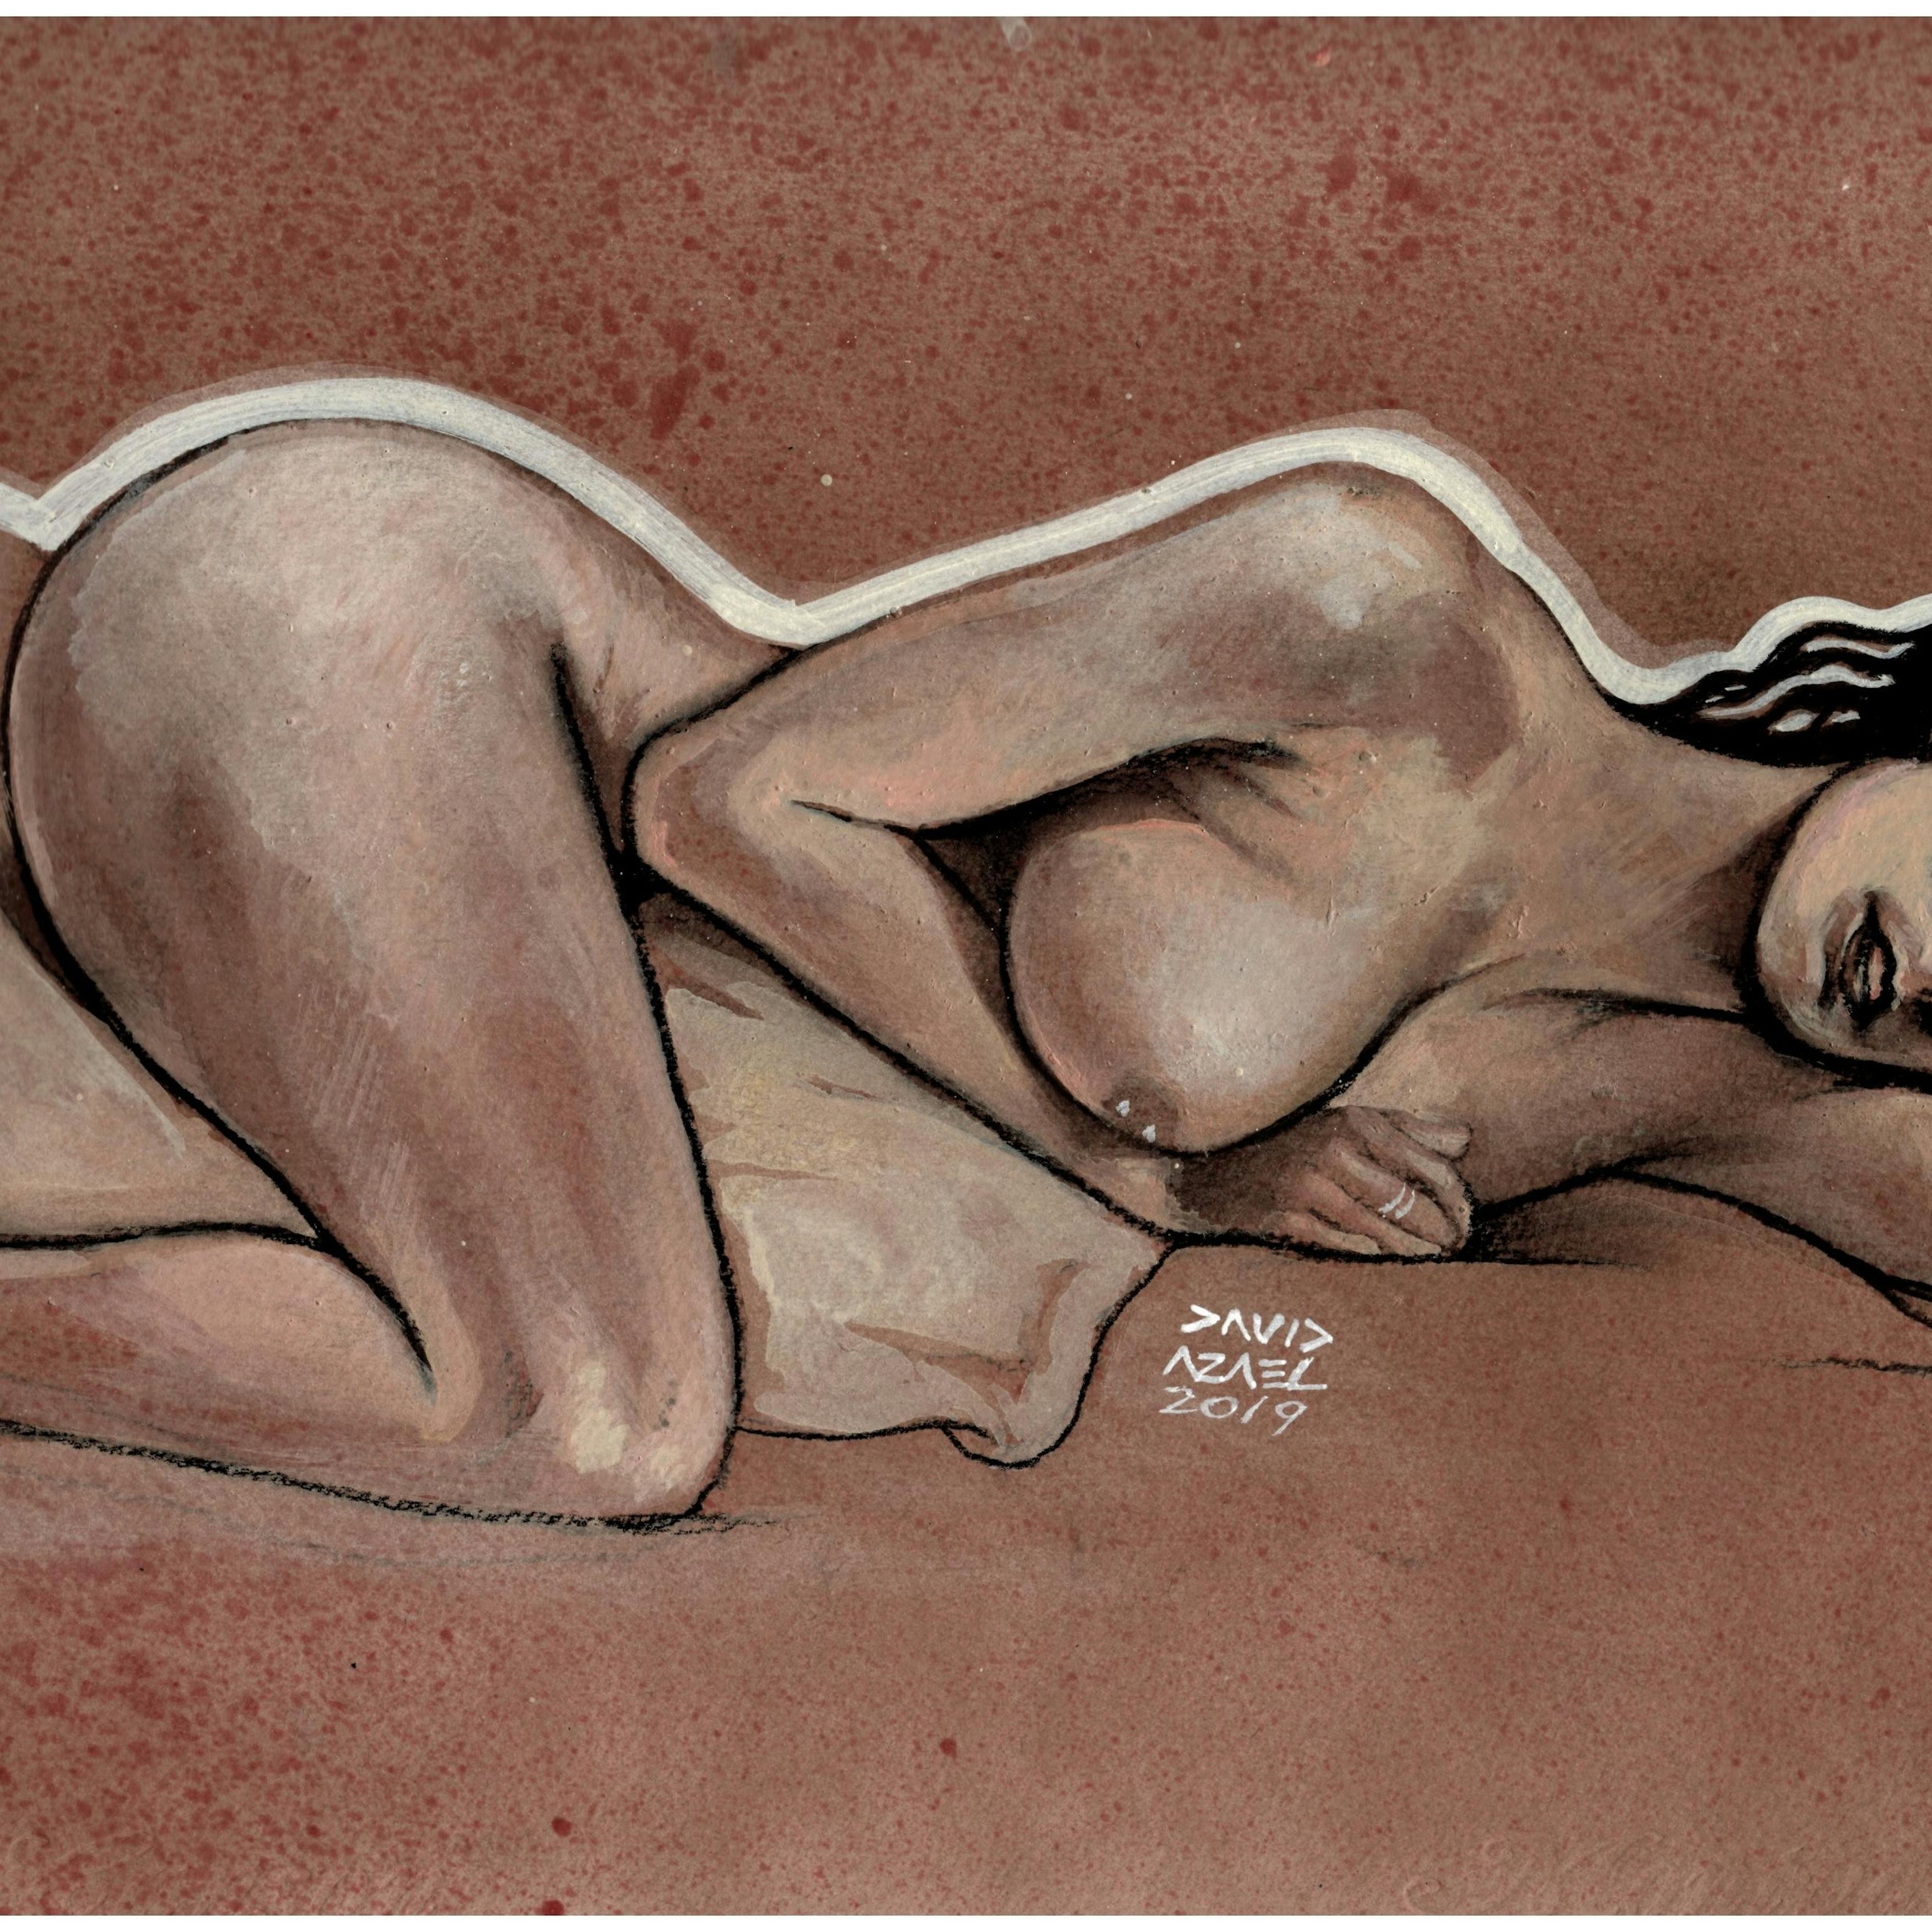 Porn Illustrations by David Azael | XConfessions Porn for Women